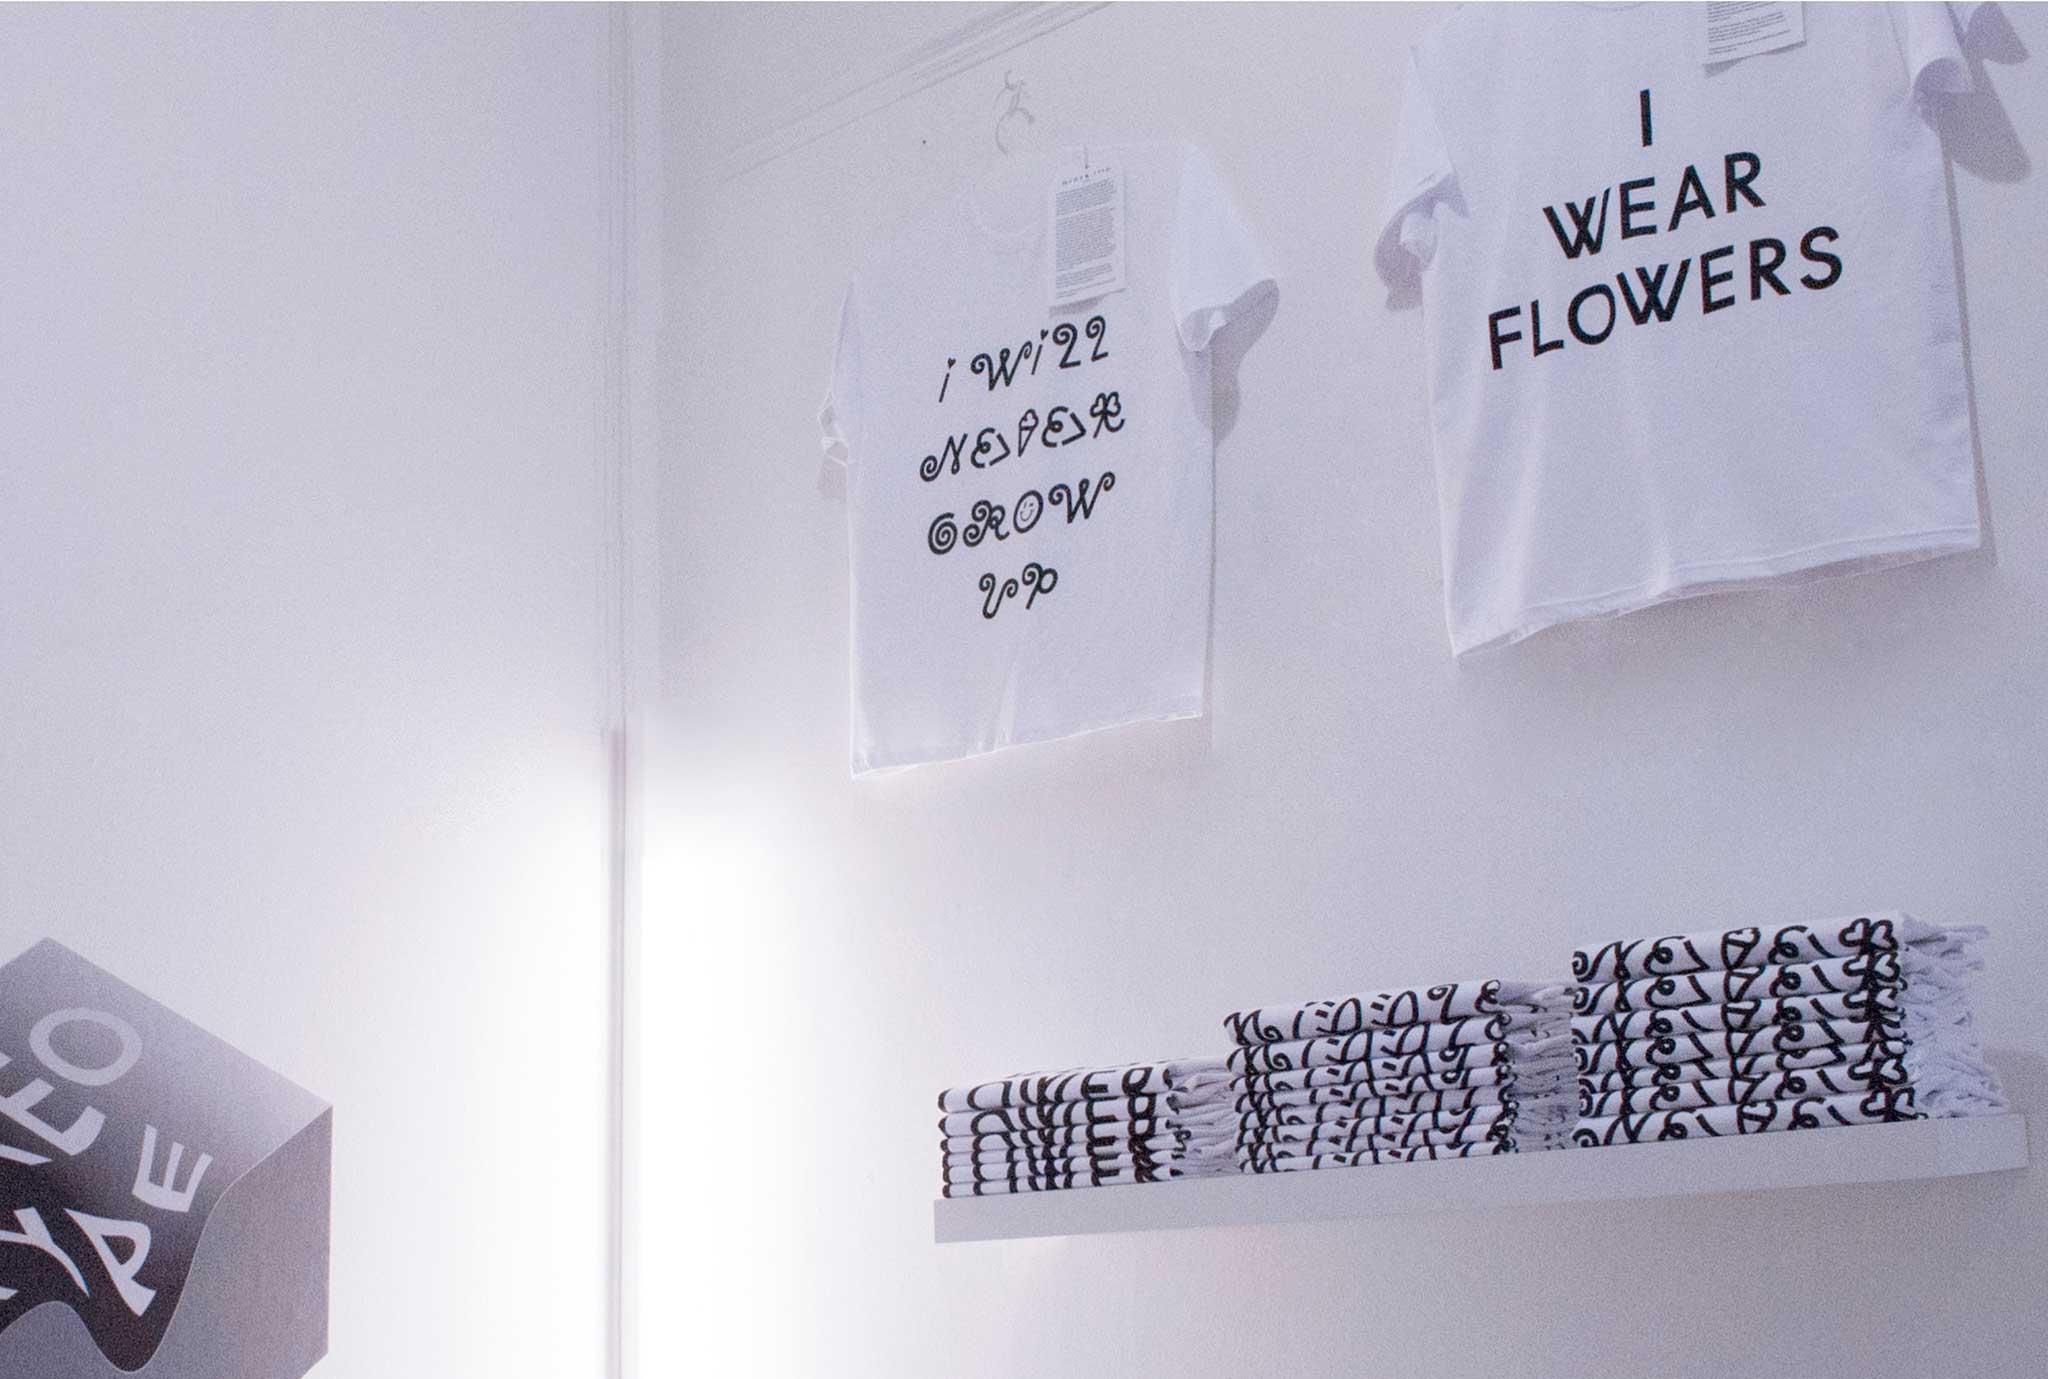 RCA SHOW 2015 Queertype t-shirts